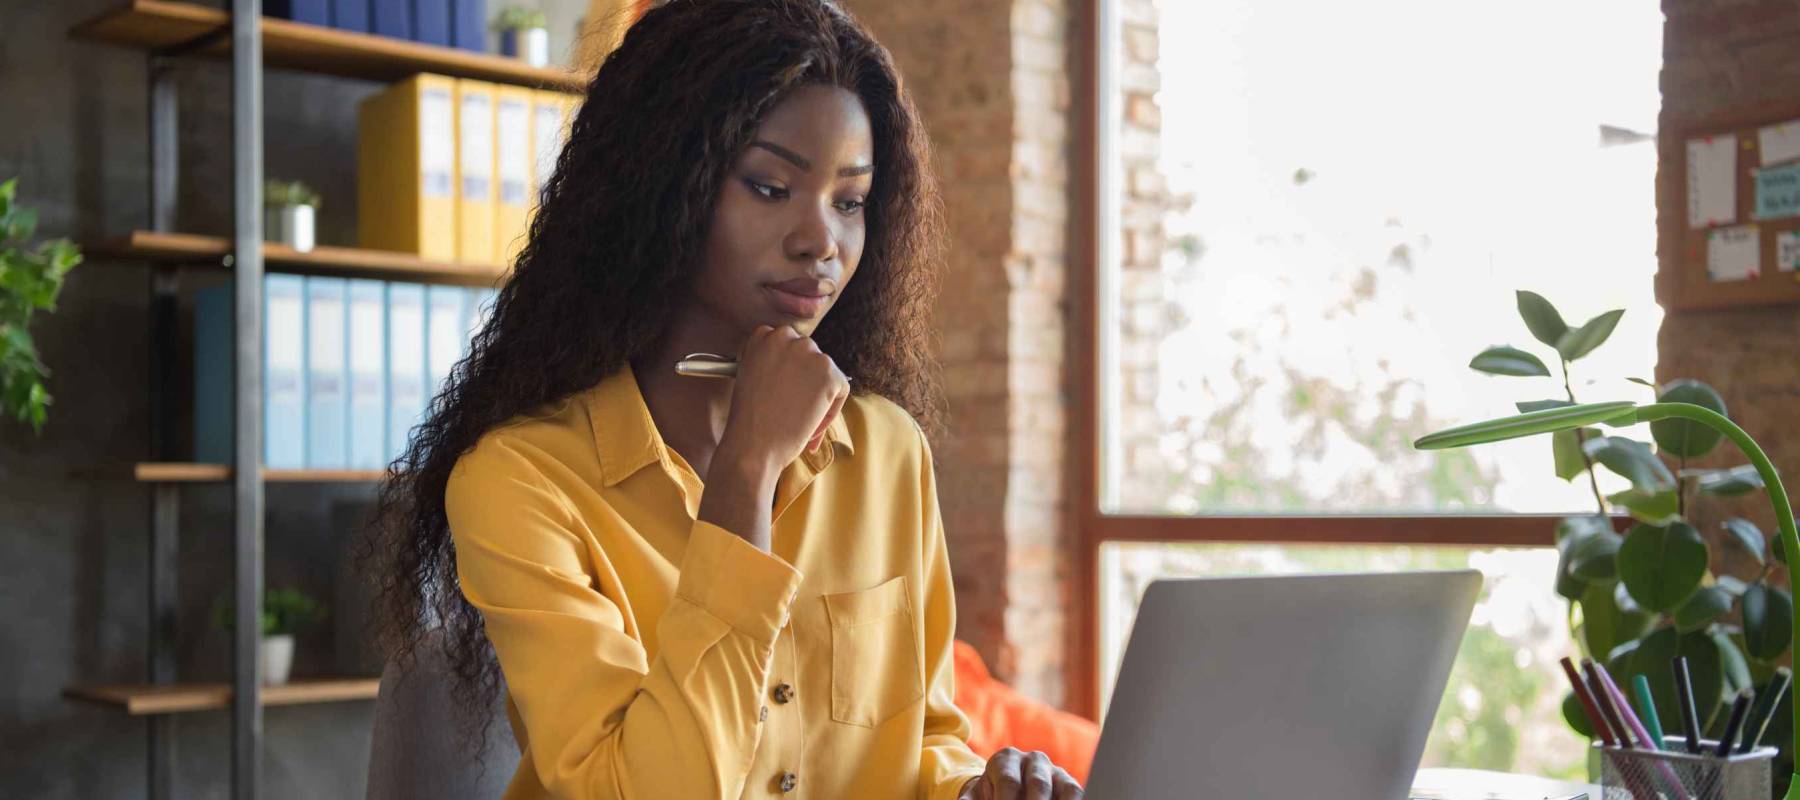 Photo of thoughtful dark skin woman browse internet laptop on table think business plan wear yellow shirt indoors in office